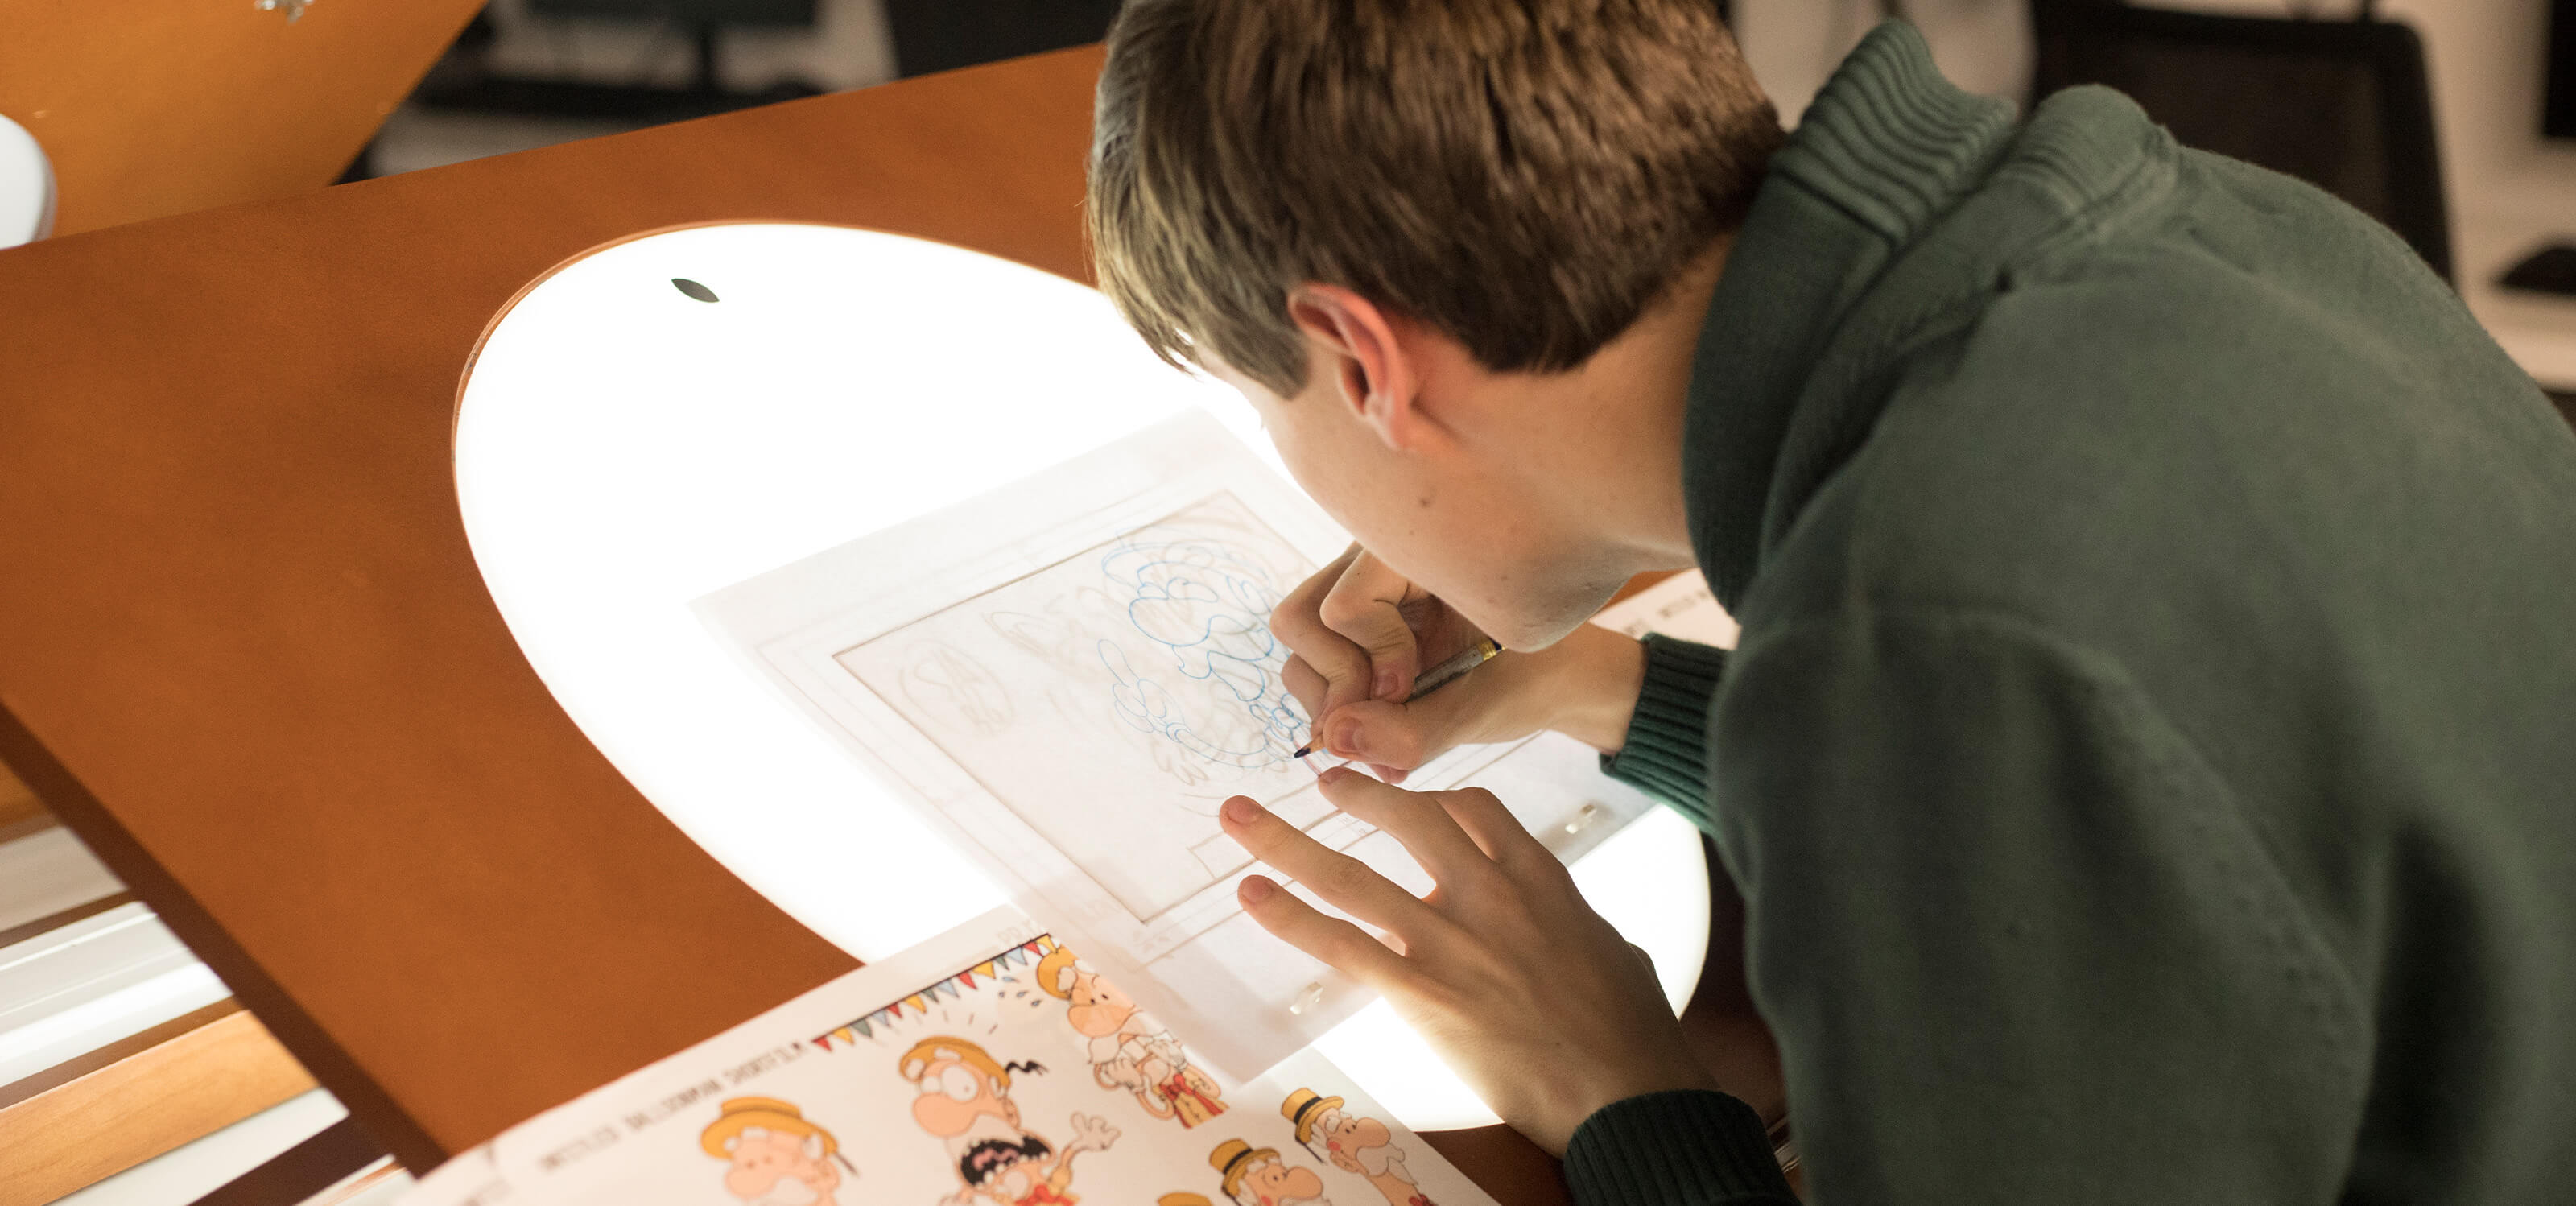 A student uses a drawing table with a backlight to outline a character design.